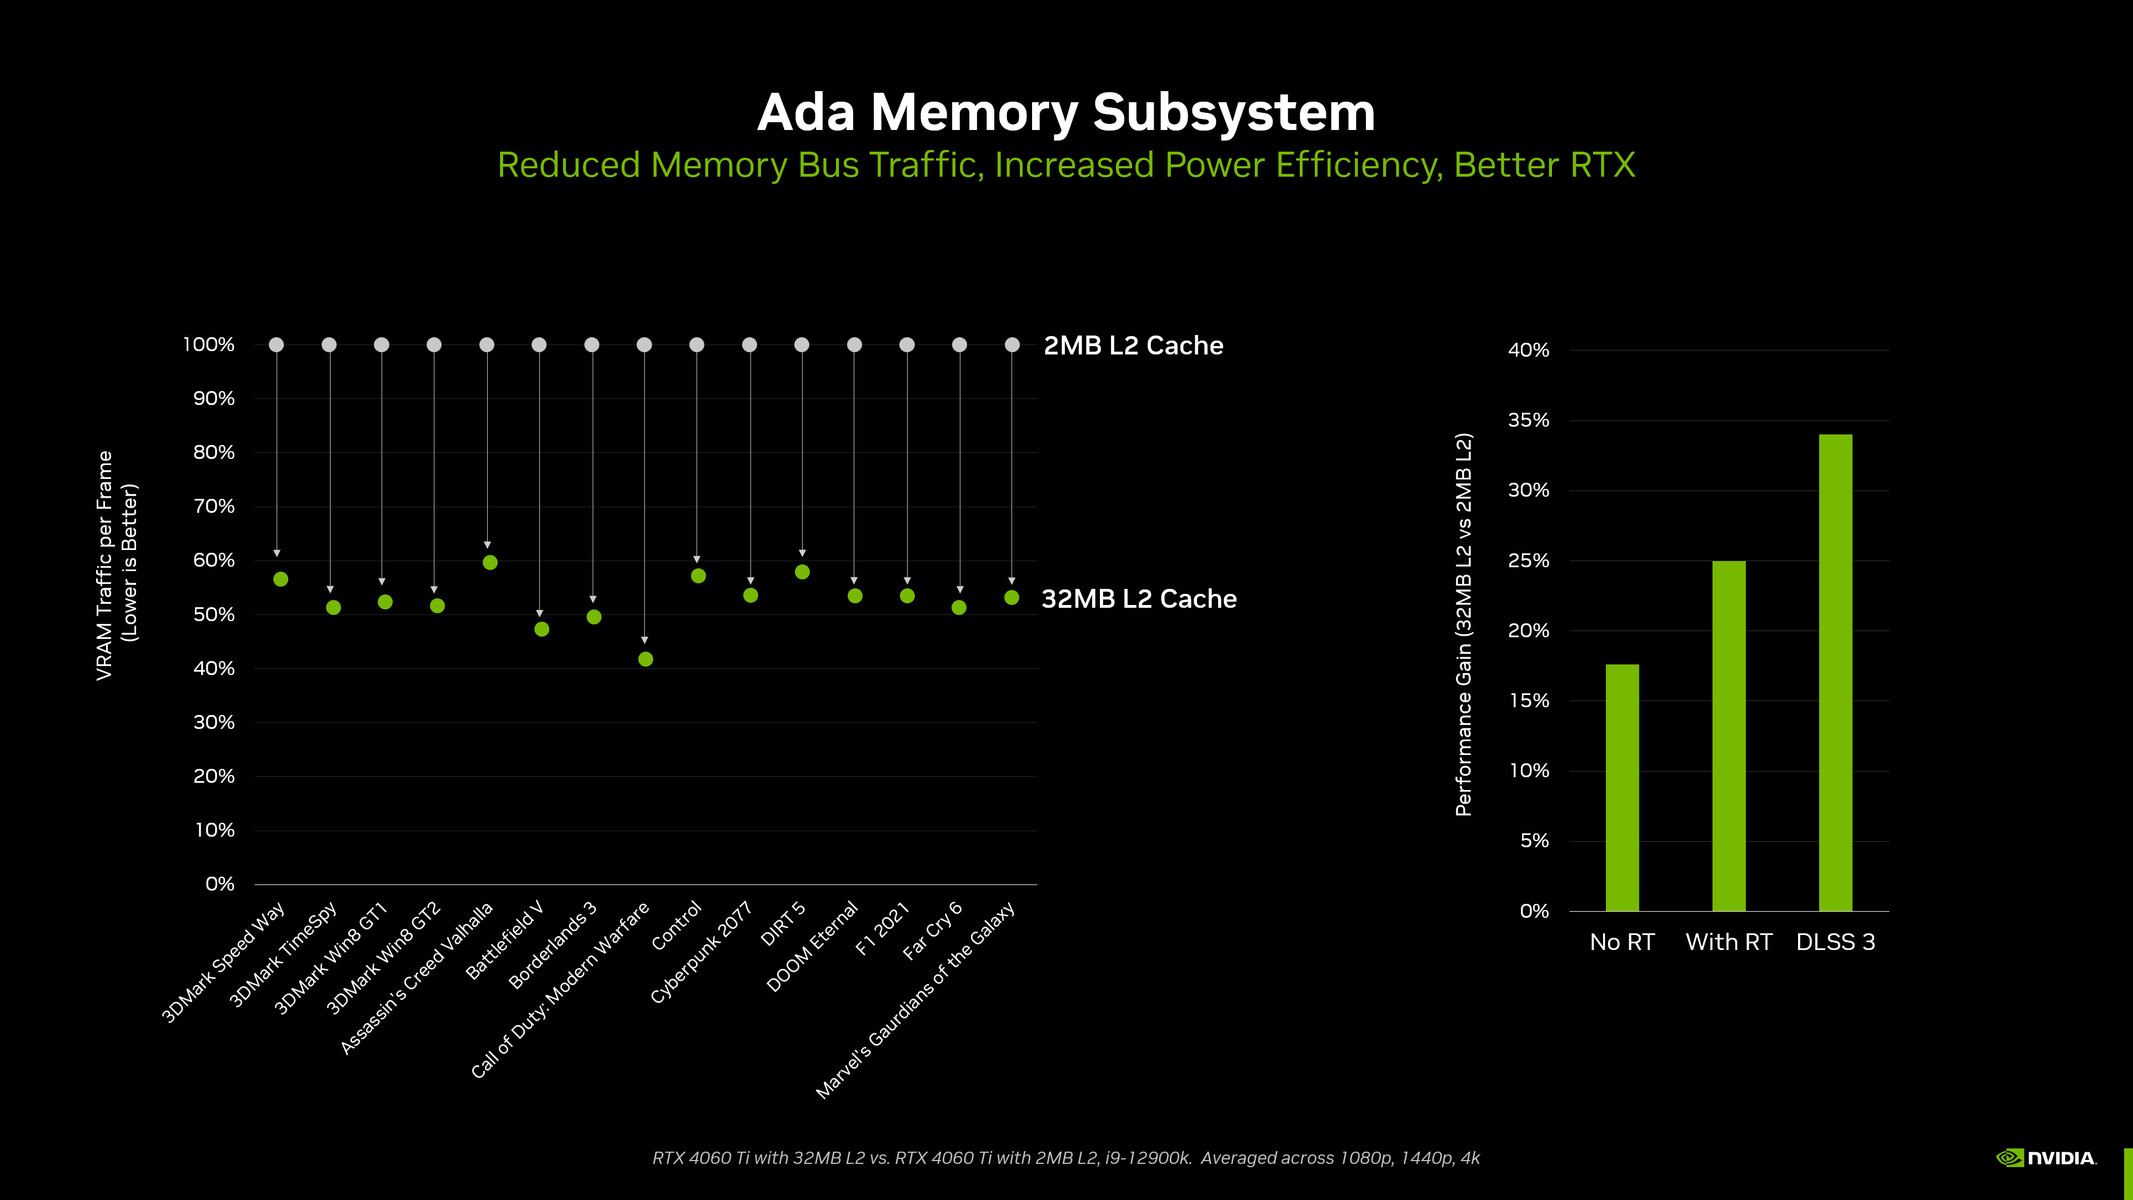 Nvidia Provides Details On Vram Usage, Memory Subsystem And Cache On Rtx 40 Cards